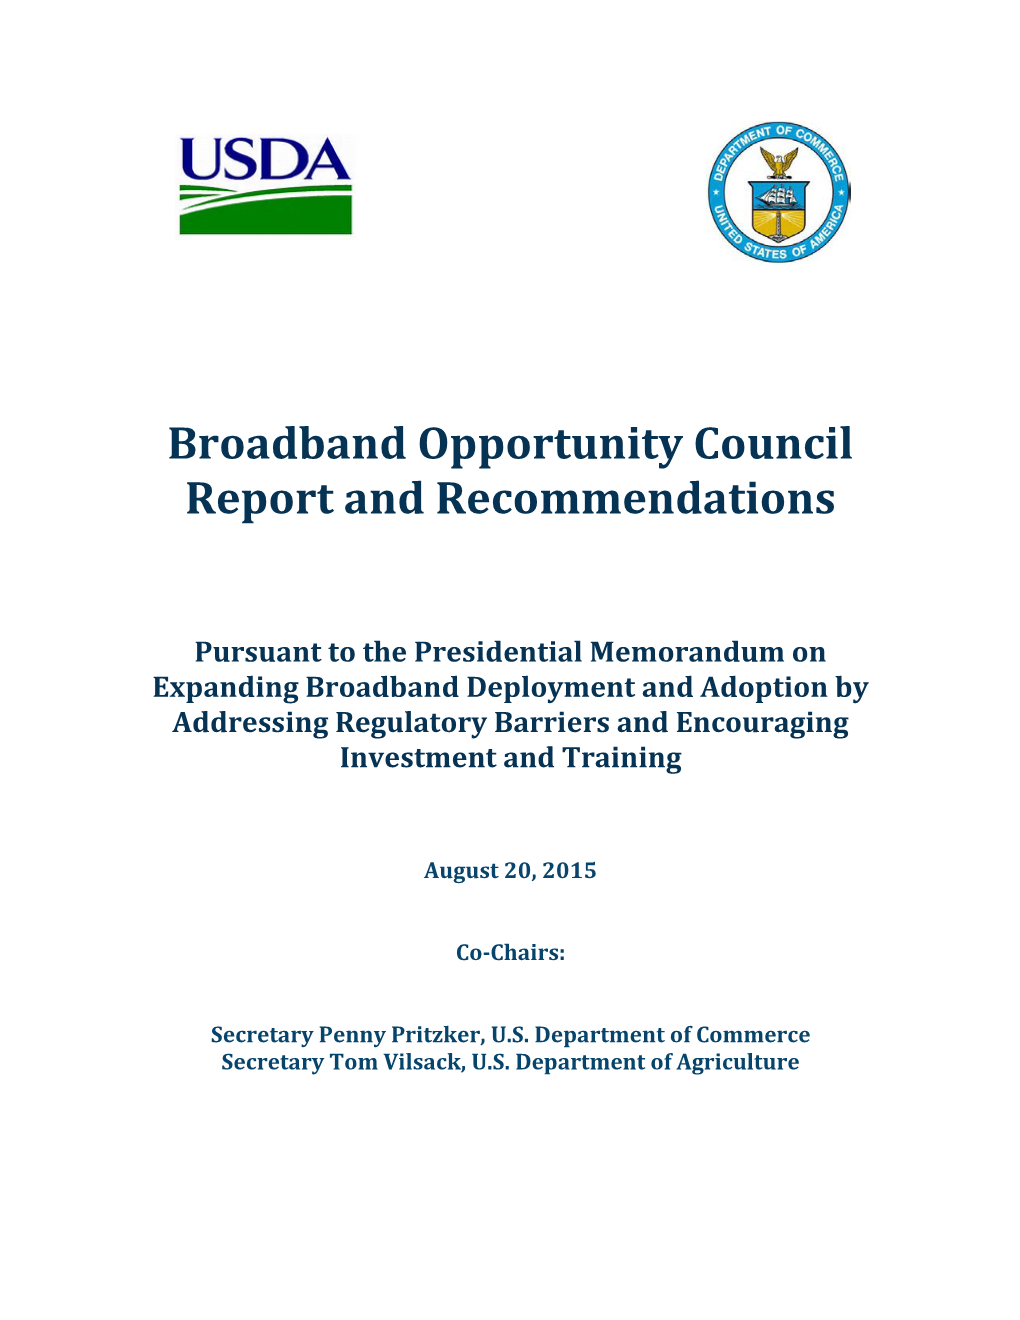 Broadband Opportunity Council Report and Recommendations